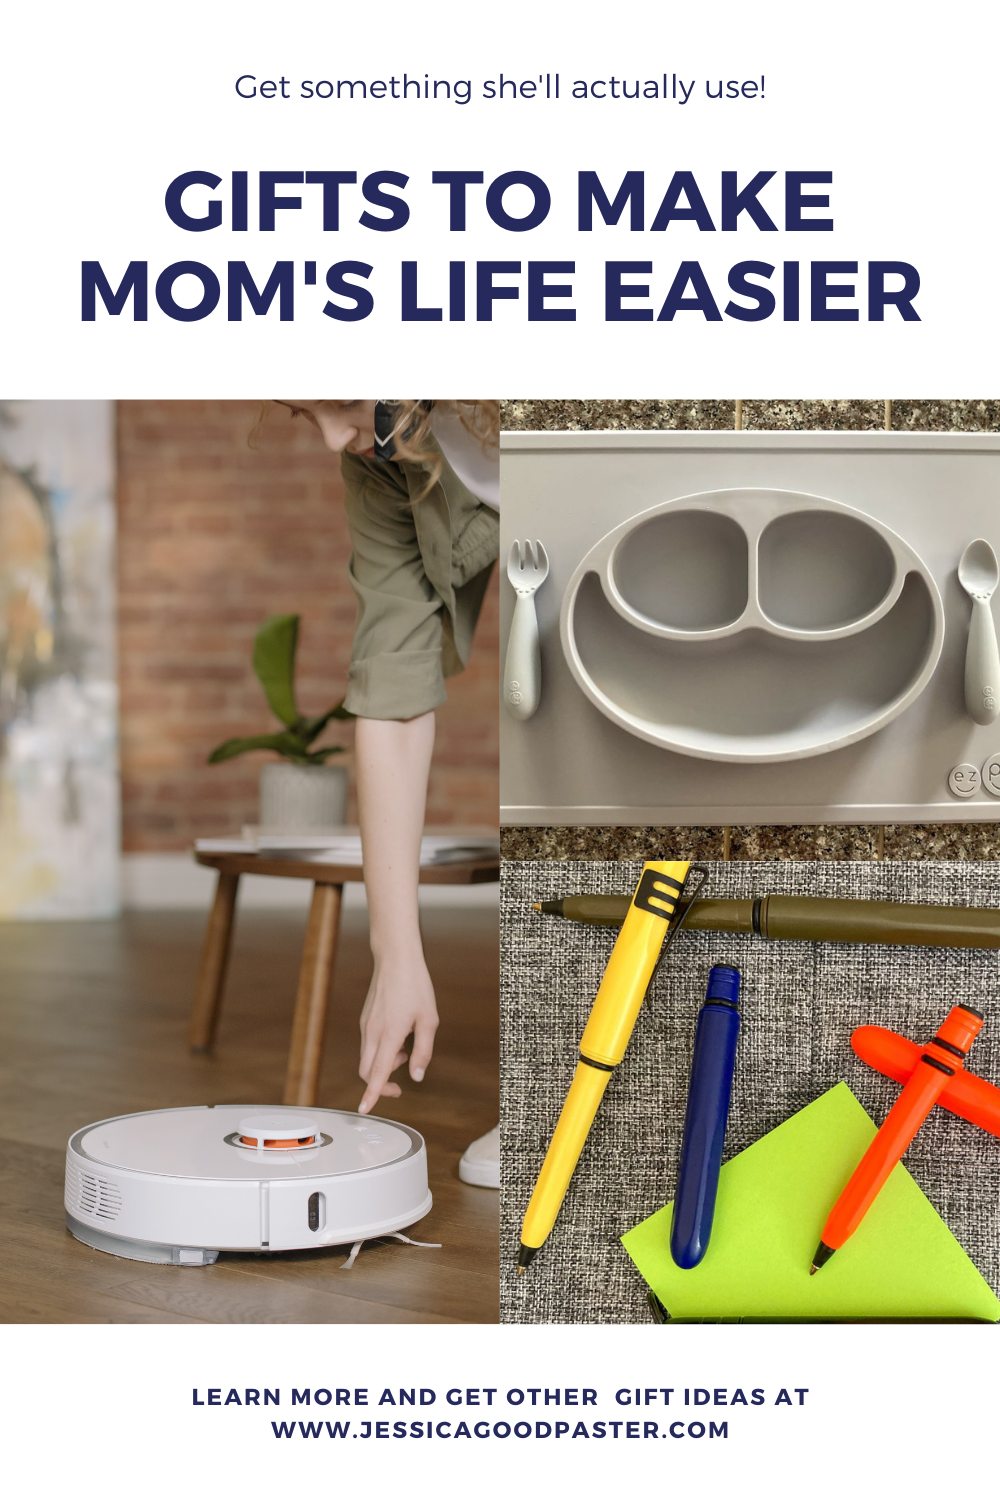 Useful Gifts for Moms with Young Kids and 20+ Unique Gift Ideas Mom is Sure  | Find the perfect Christmas gift for your mom, grandmother, or wife with this list of unique gift ideas! Some are meaningful, fun, useful, or edible. Also includes the best subscription box ideas. Even if your mom has everything, you'll find the present that is just right! #christmasgifts #giftideas #giftideasforher #giftideasformom #uniquegifts #fungiftideas #thoughtfulgifts #christmas20